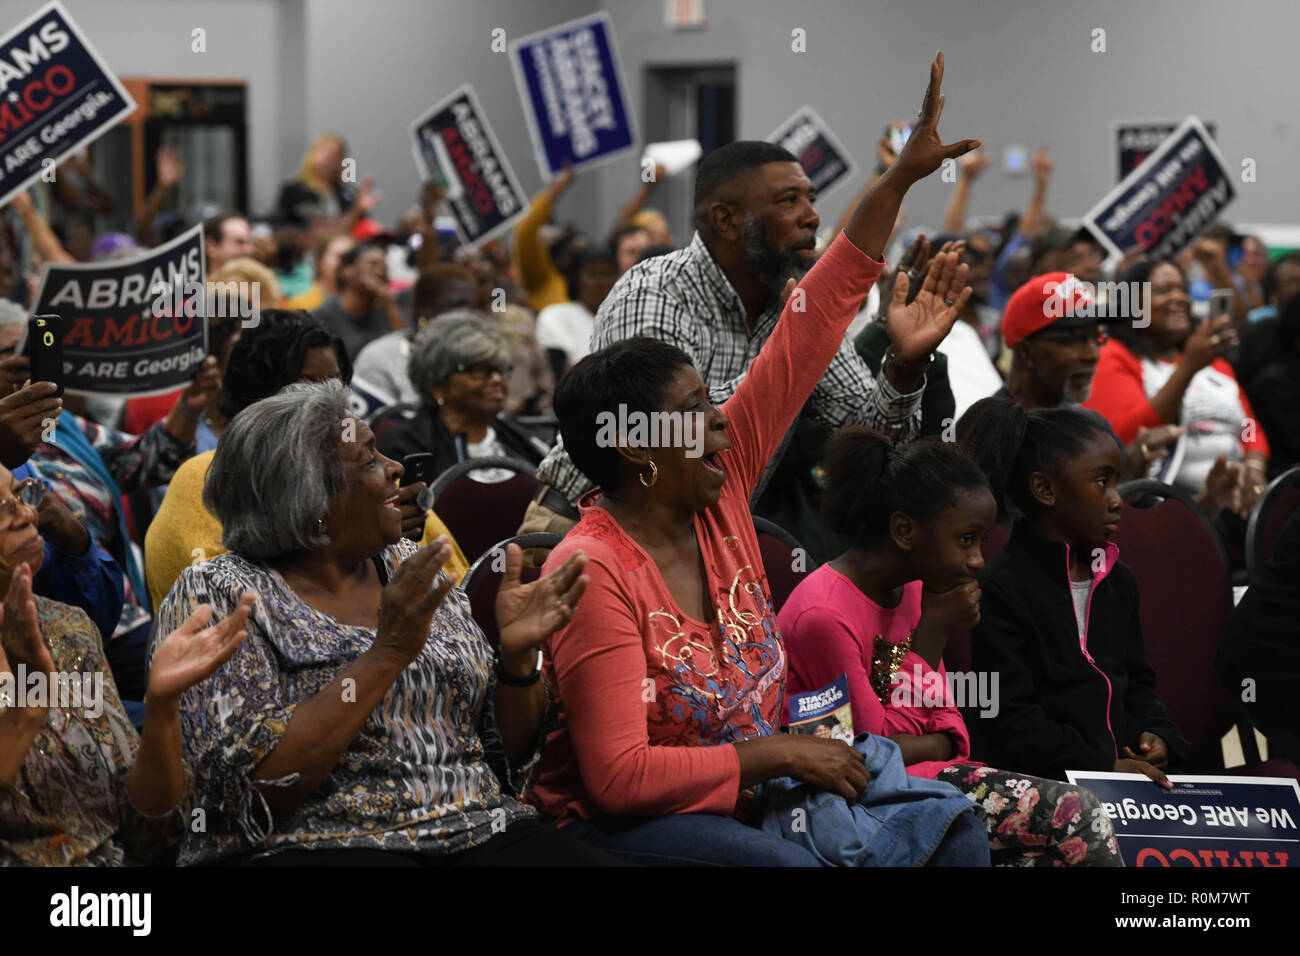 Baxley, Georgia, USA. 5th Nov, 2018. Georgia candidate governor Stacey Abrams supporters cheer to her at the Parker-Harrell Progressive Resource school in Baxley, Georgia on Monday, following a strategy of aggressively courting votes in tiny rural towns often overlooked by Democratic camdidates. Abrams -who colud became the nation's forst black woman governor- is in statiscal tie with opponent Brian Kemp in one of the most-watched mid-term races. Credit: Miguel Juarez Lugo/ZUMA Wire/Alamy Live News Stock Photo